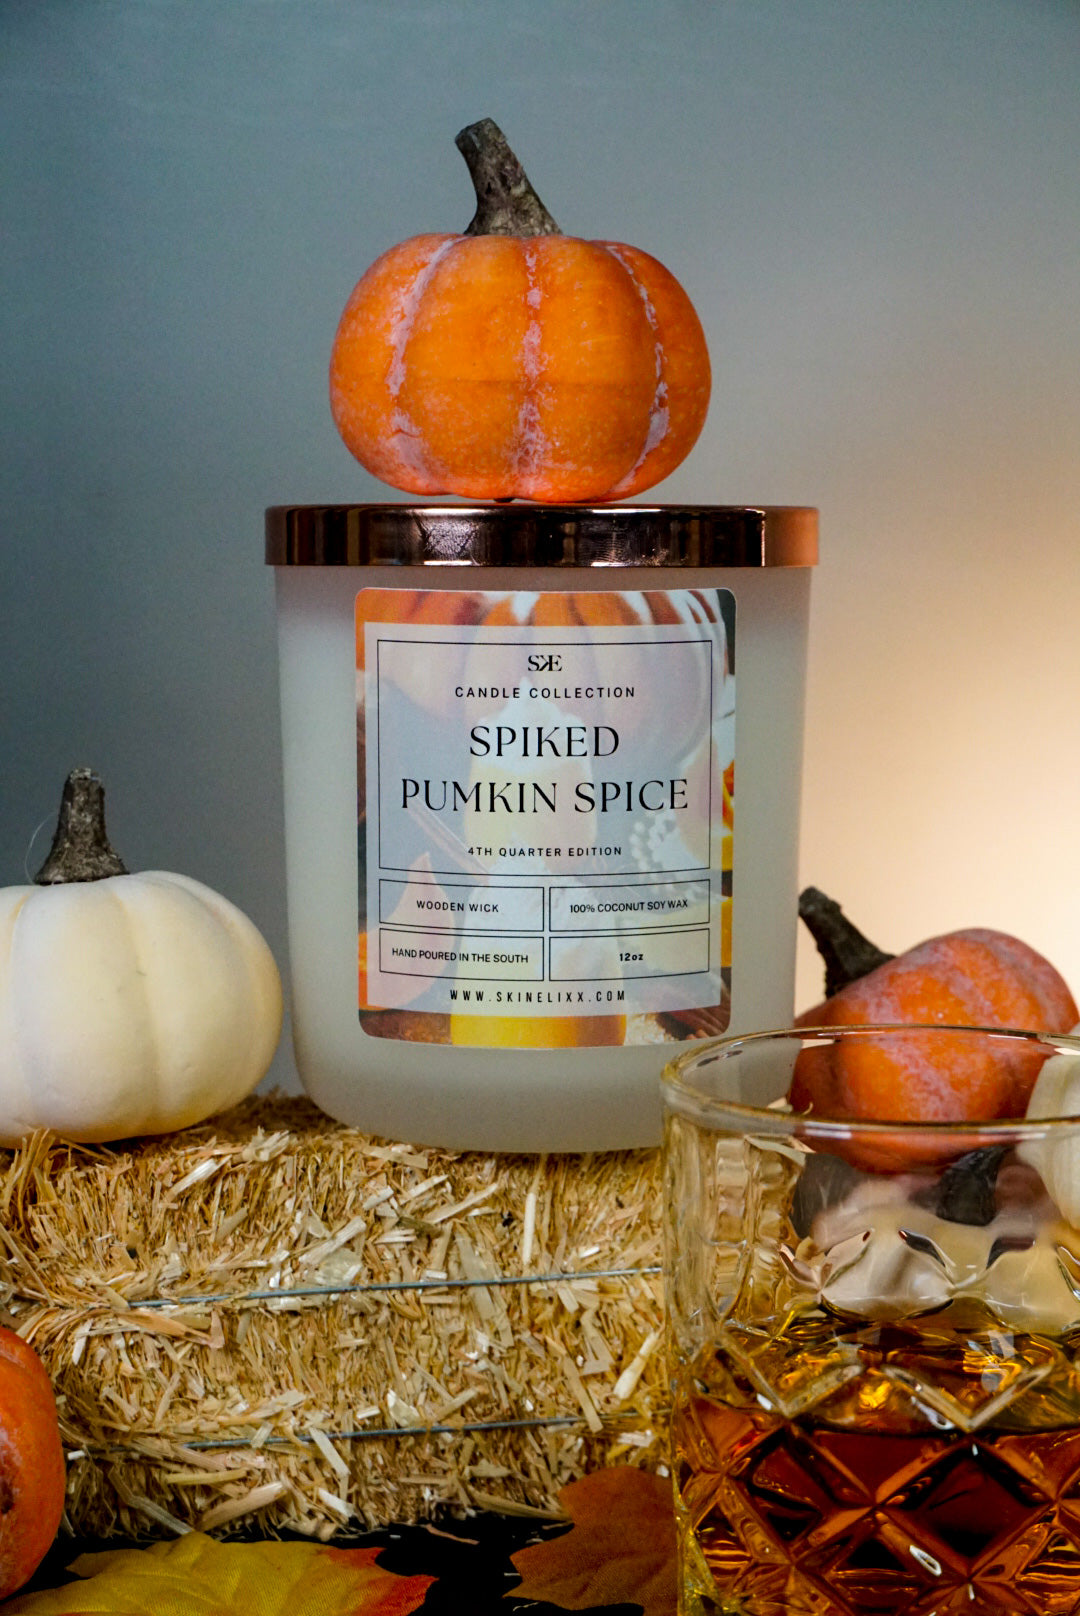 SPIKED PUMPIN SPICE CRACKLING WOOD WICK CANDLE